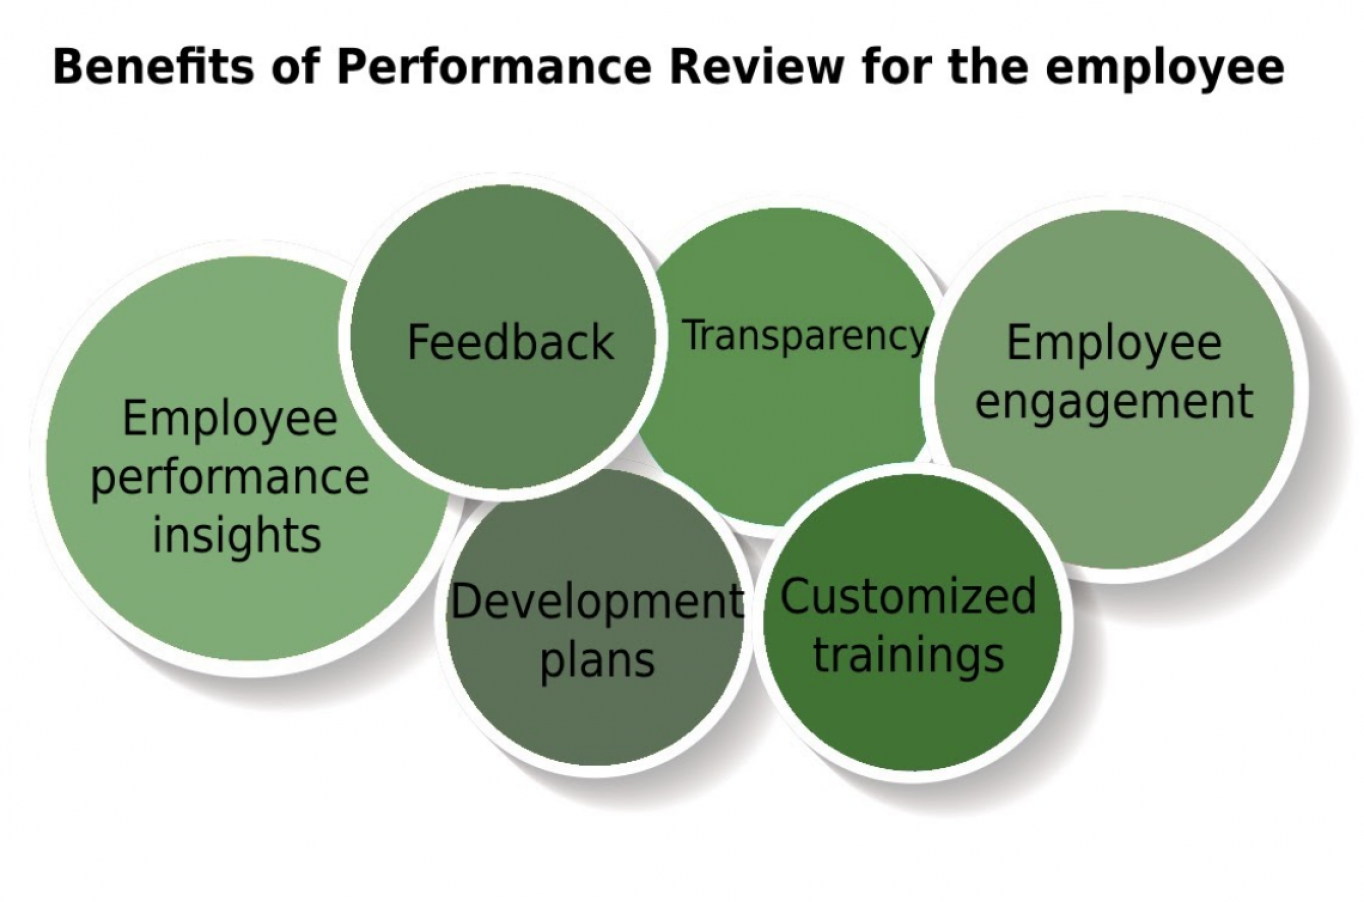 research on performance appraisal suggests